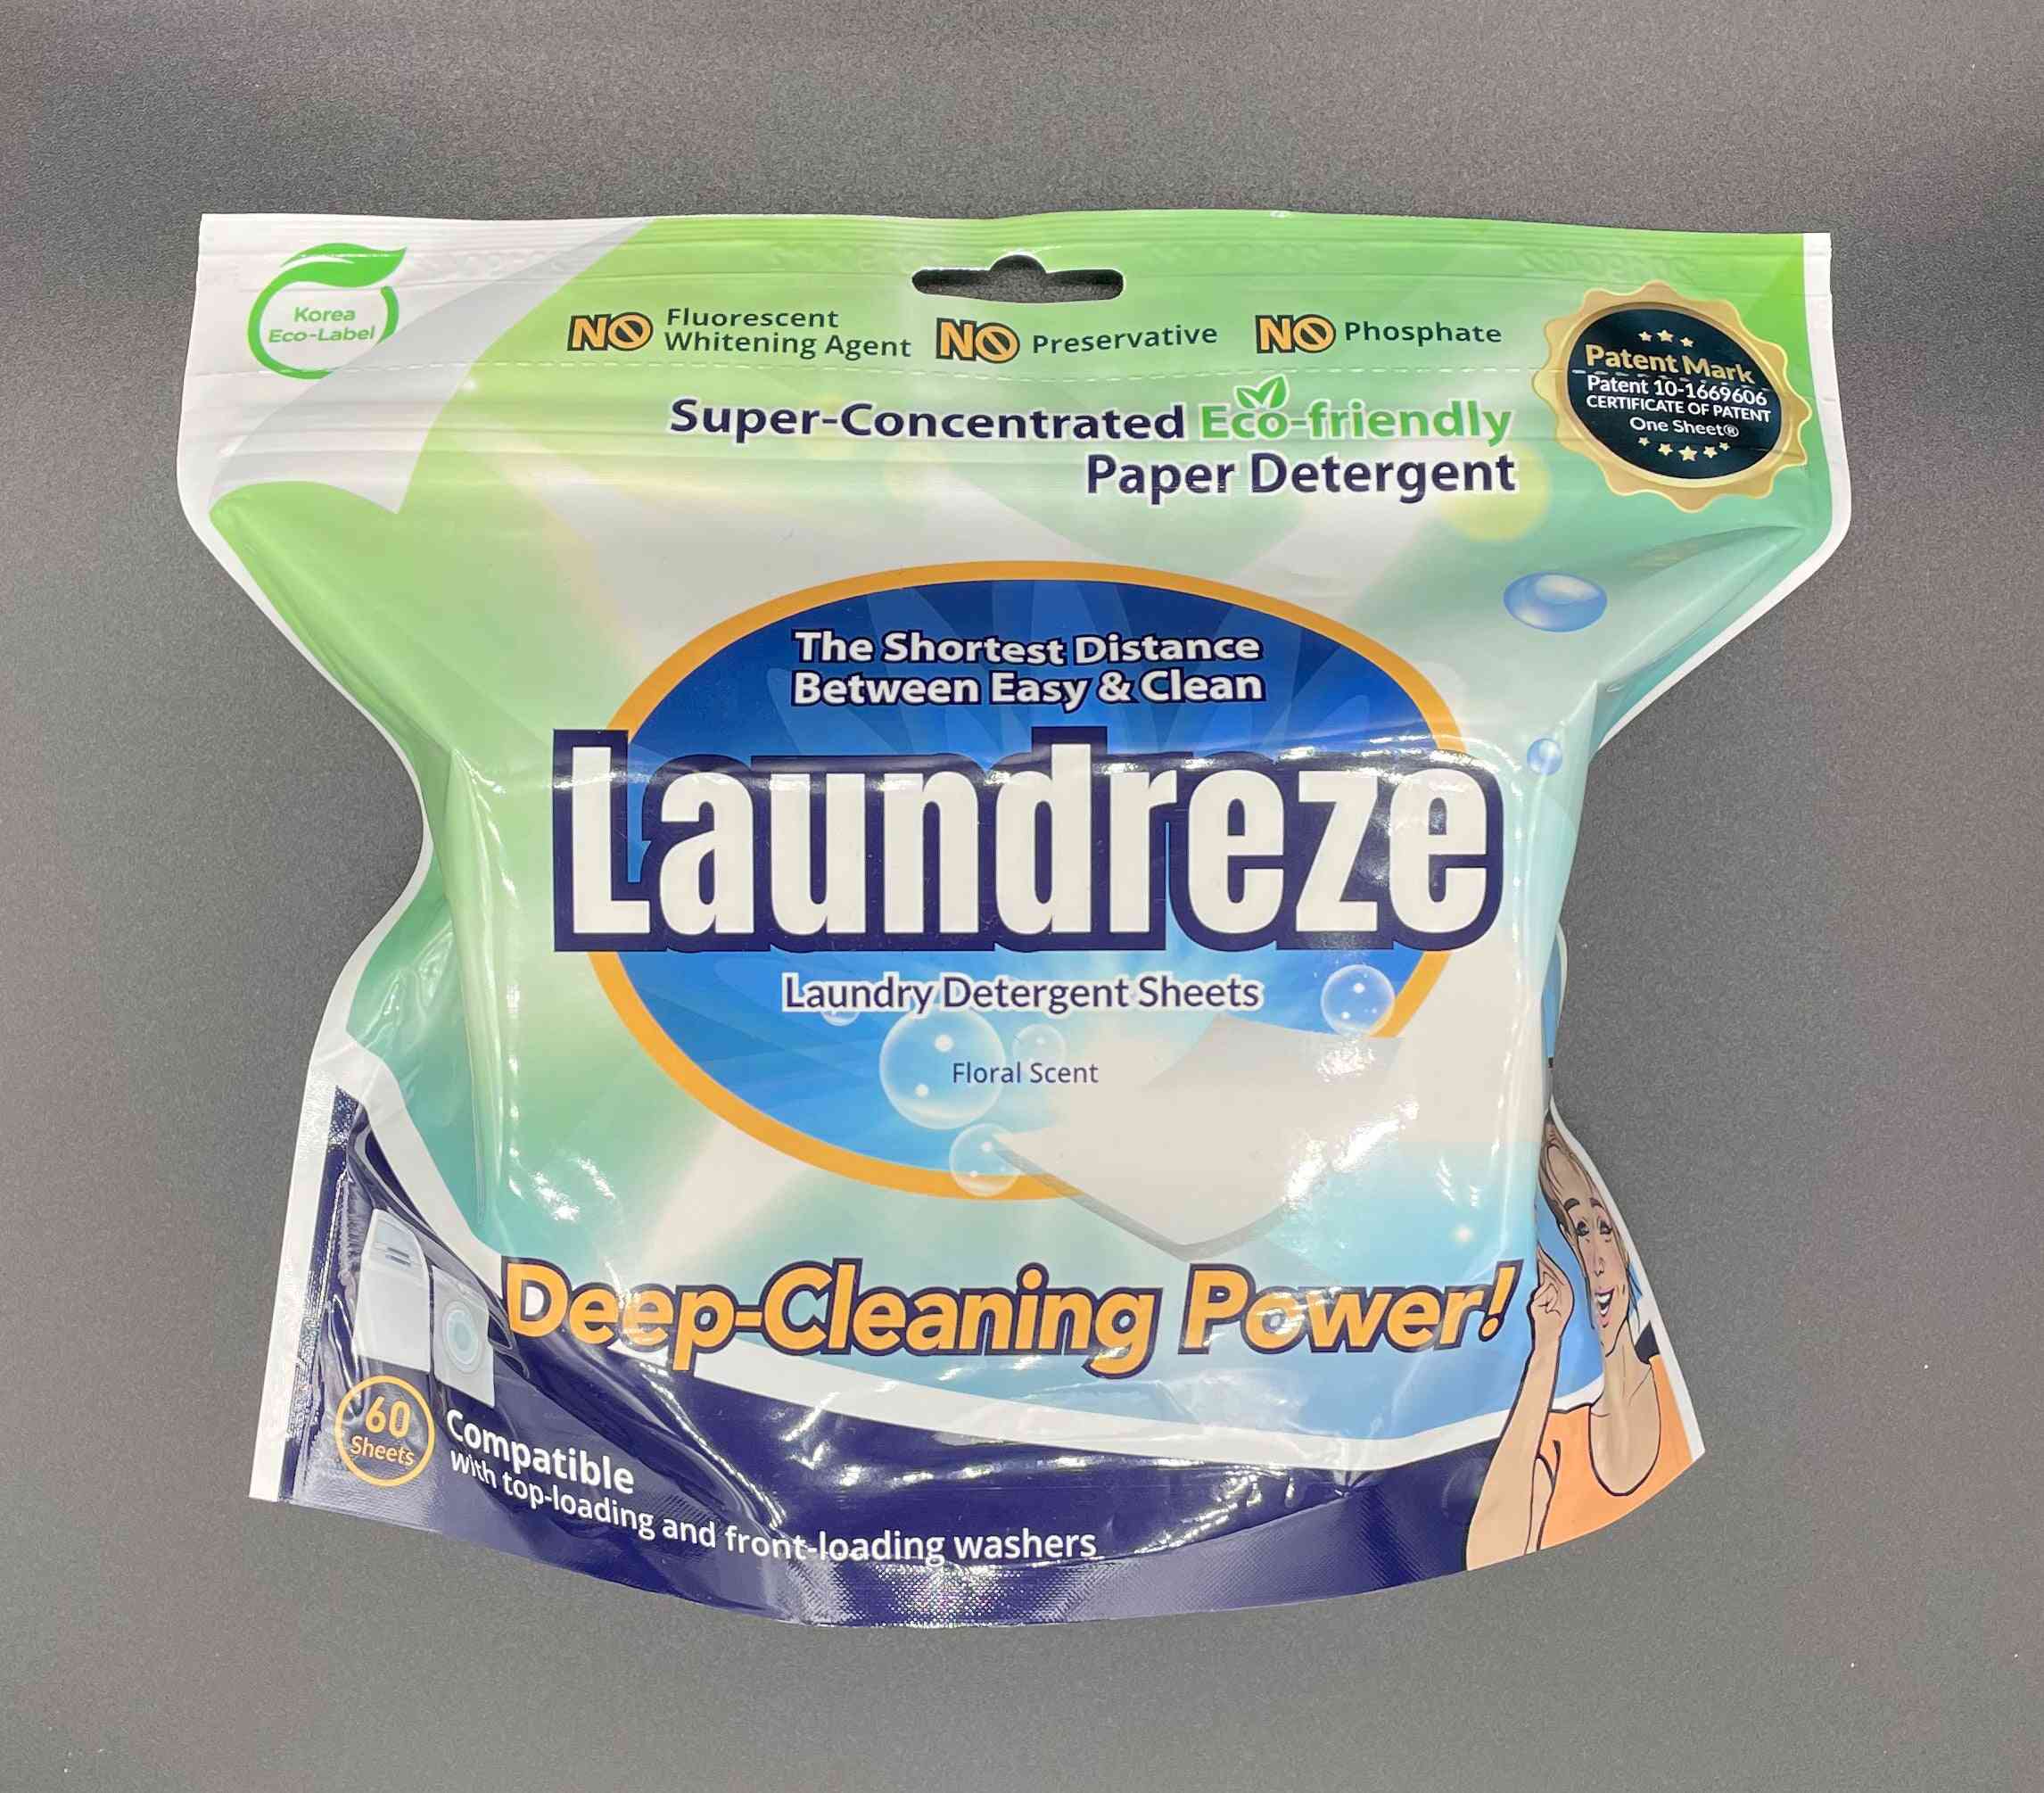 2-in-1 Laundry Detergent And Fabricsoftner Sheets (60 Sheets)